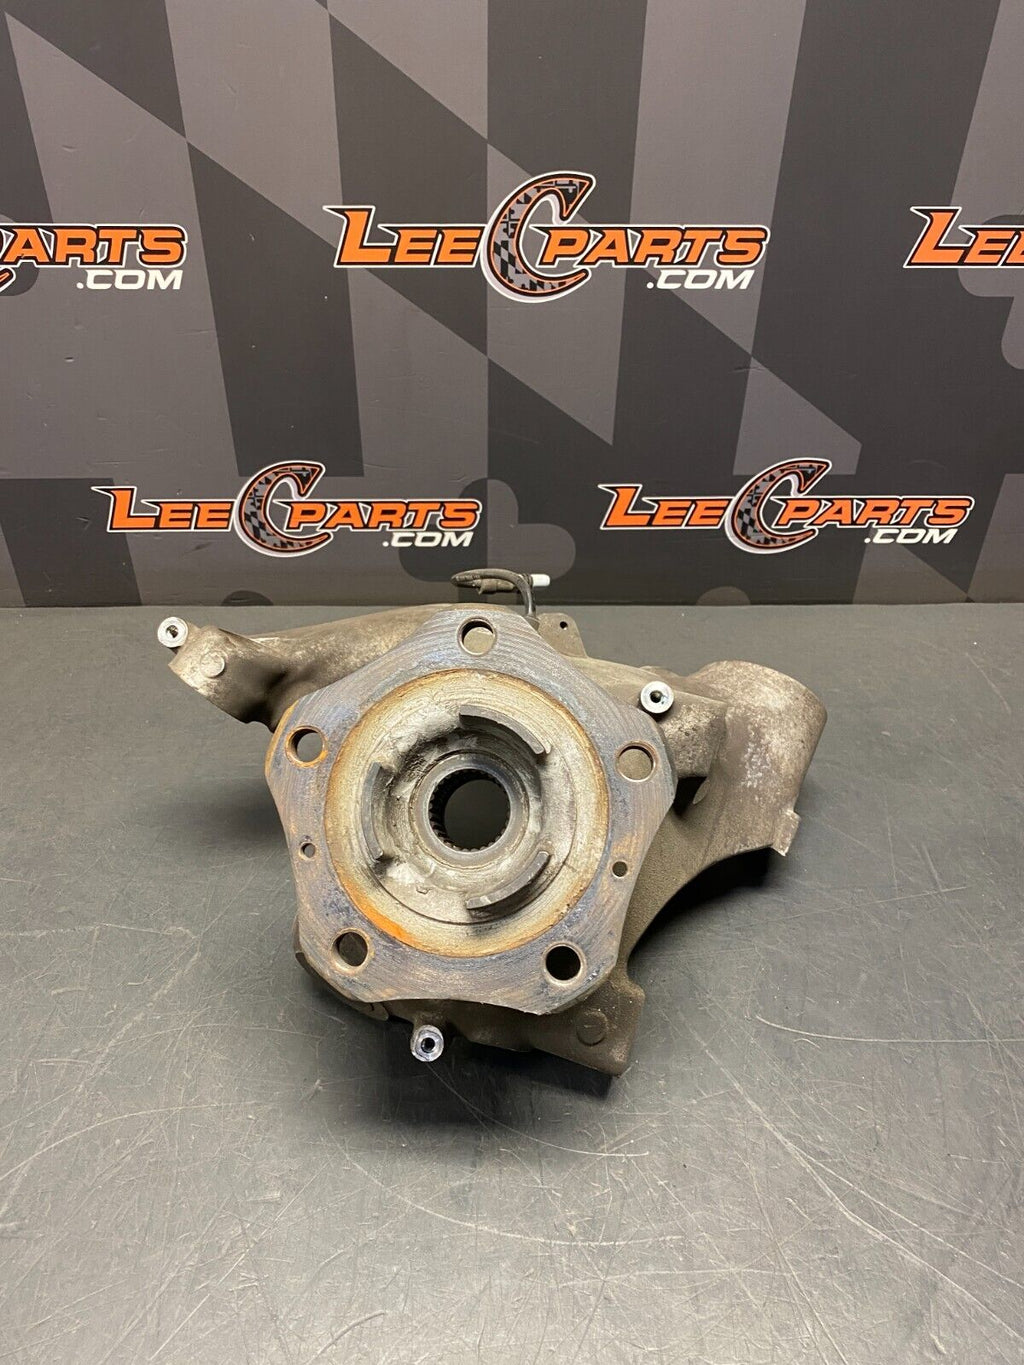 2007 PORSCHE 911 TURBO 997.1 OEM DRIVER LH FRONT HUB SPINDLE USED